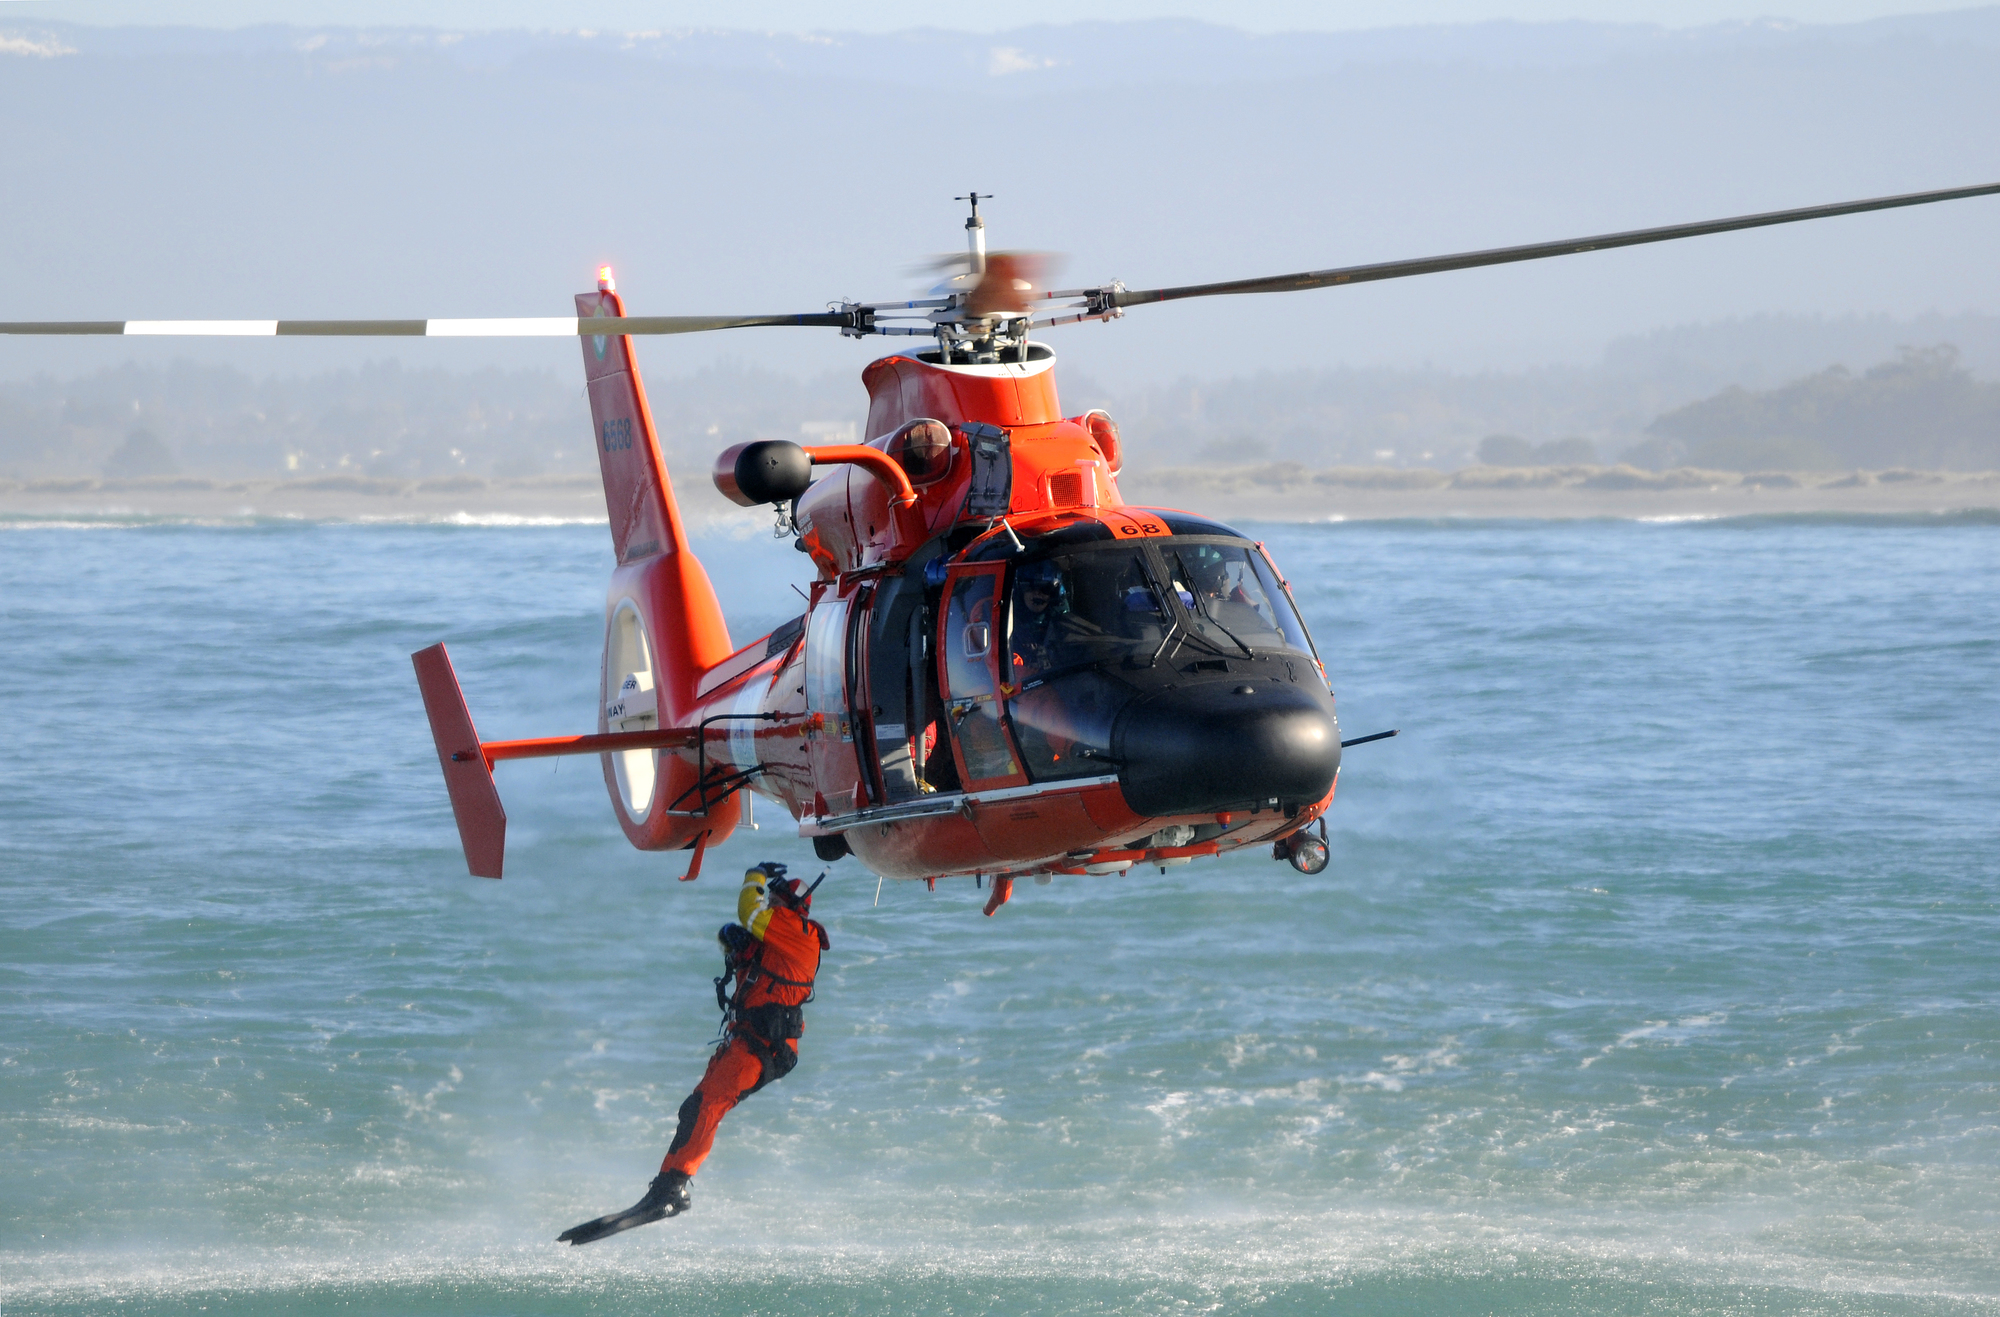 stock photo of a Dolphin helicopter conducting training